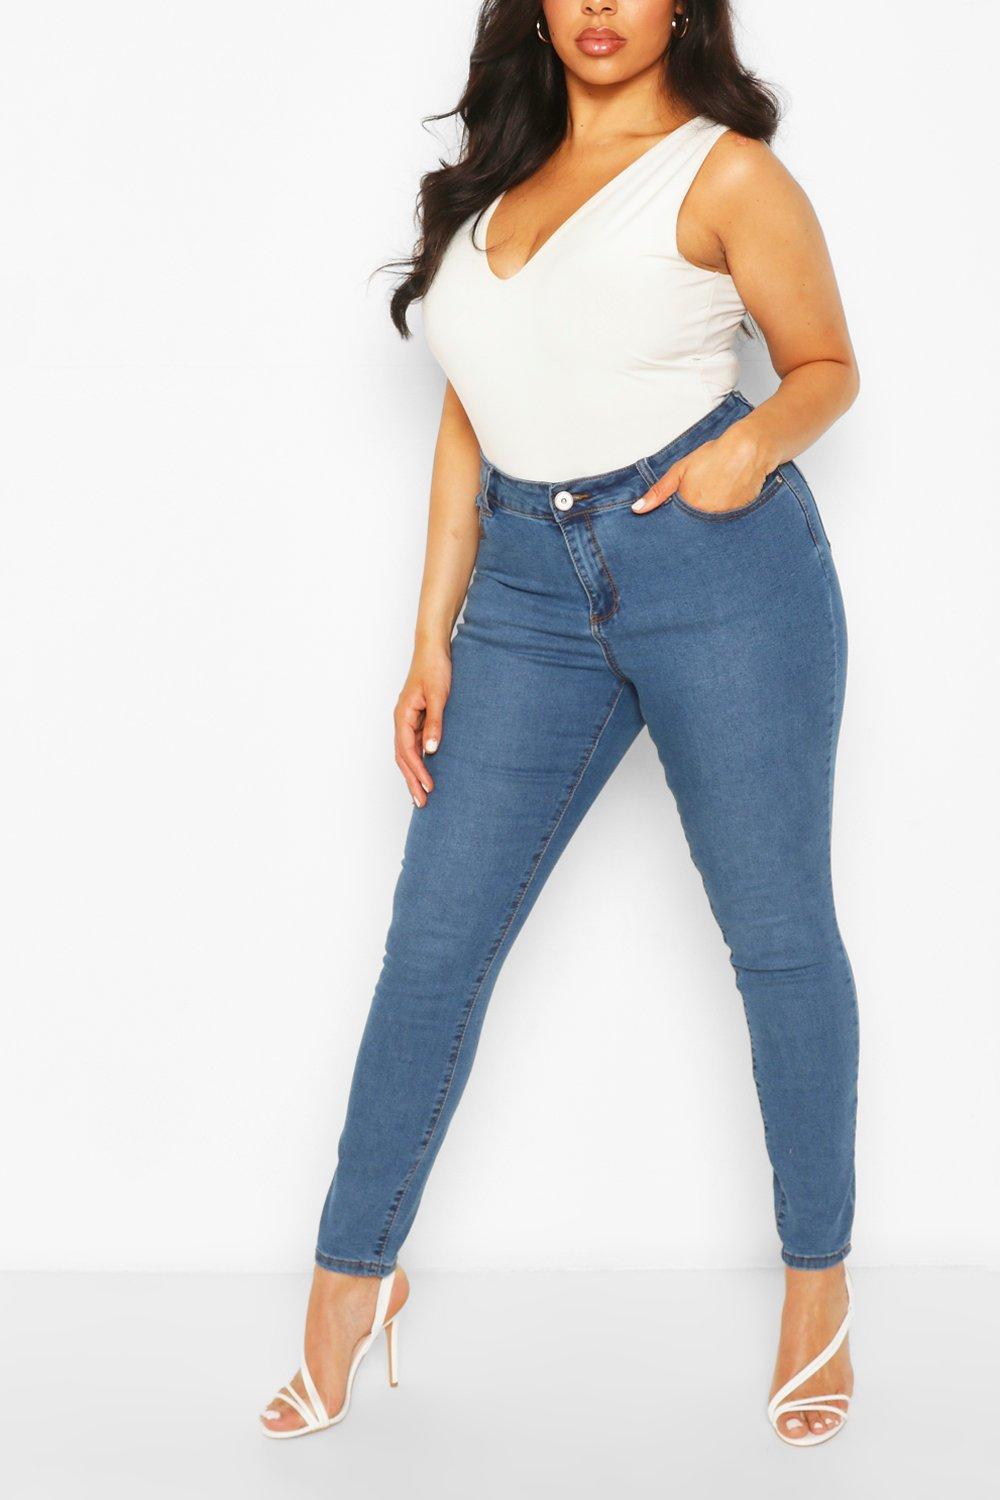 paige kylie crop with roll up